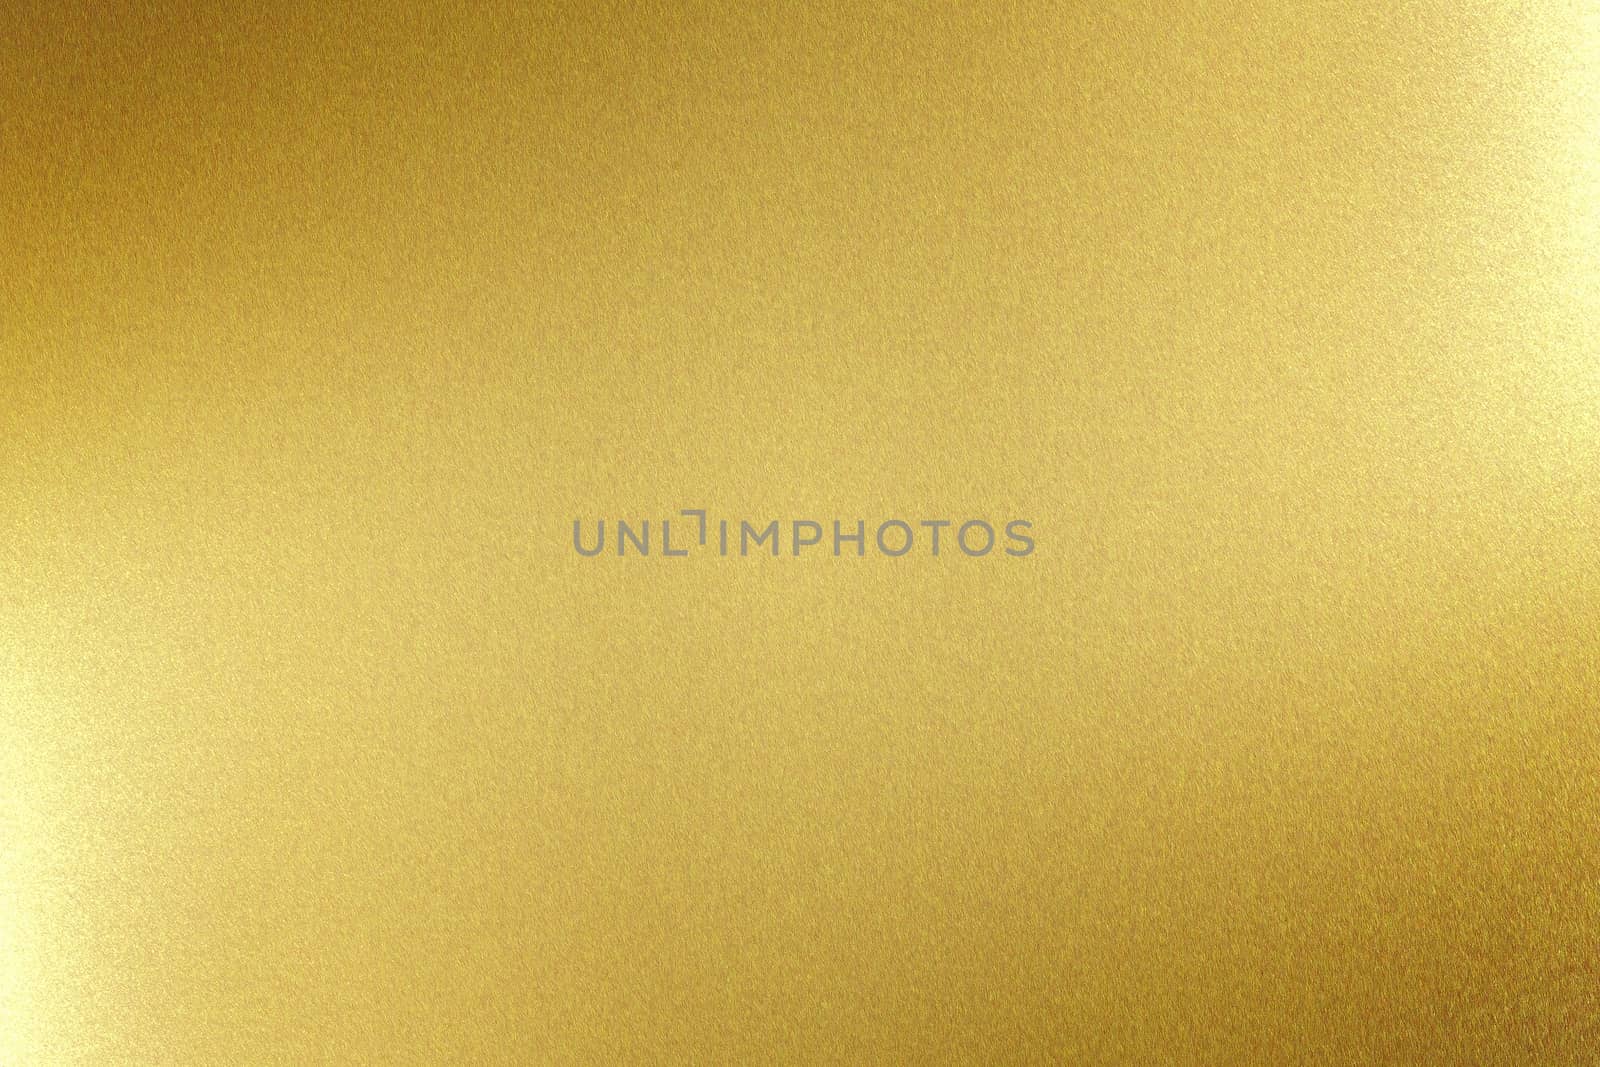 Light shining on gold metal board, abstract texture background by mouu007